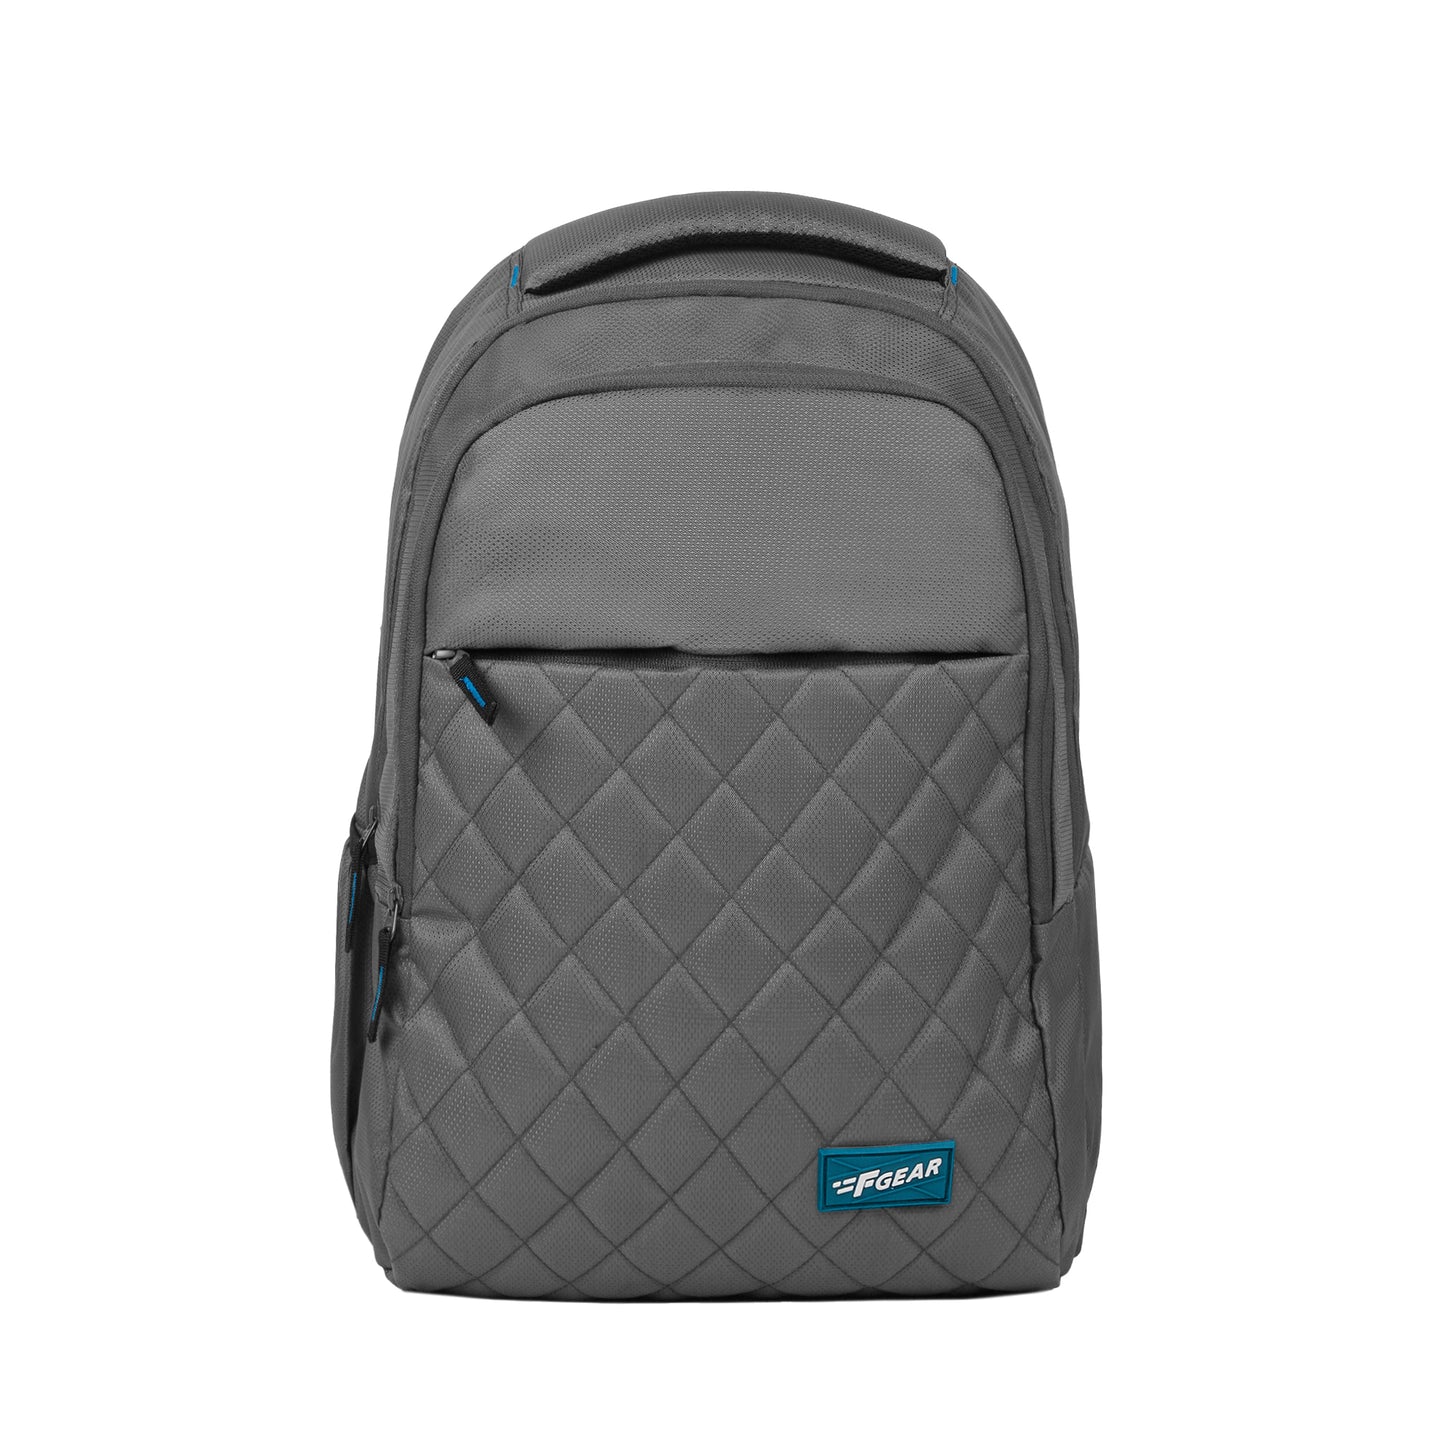 Coach Grey 26L Laptop Backpack with Rain Cover